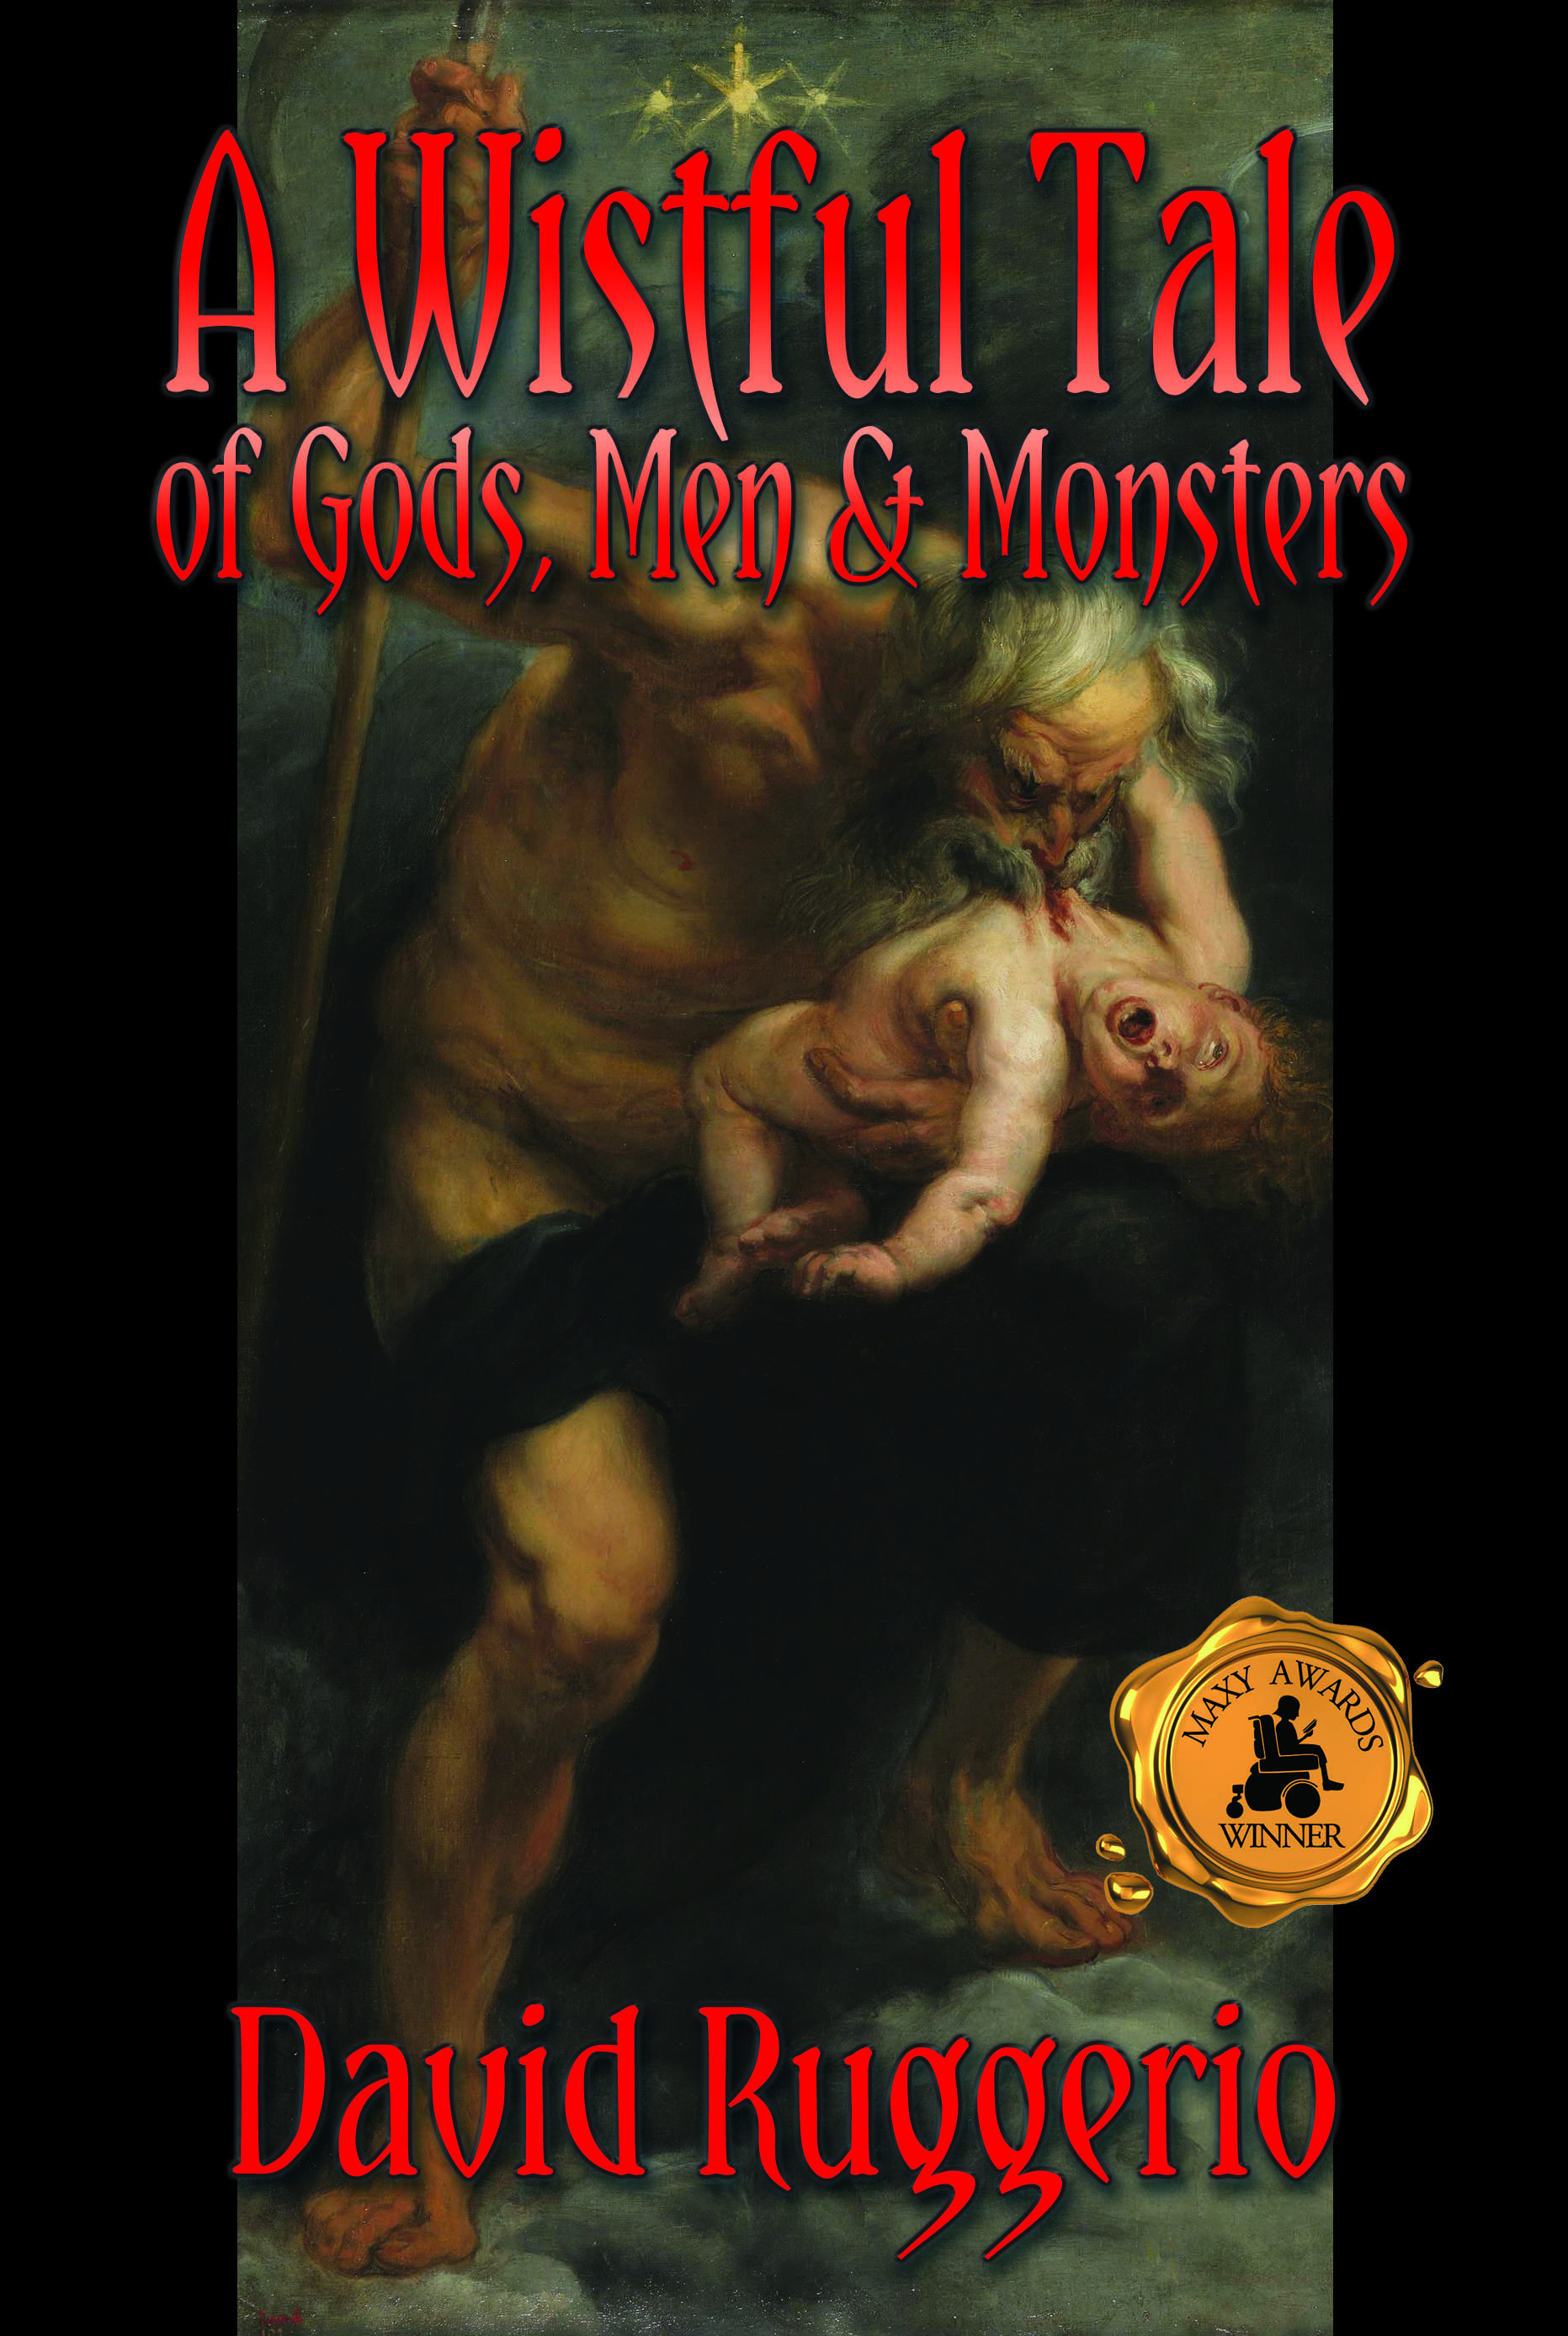 A Wistful Tale of Gods, Men, and Monsters